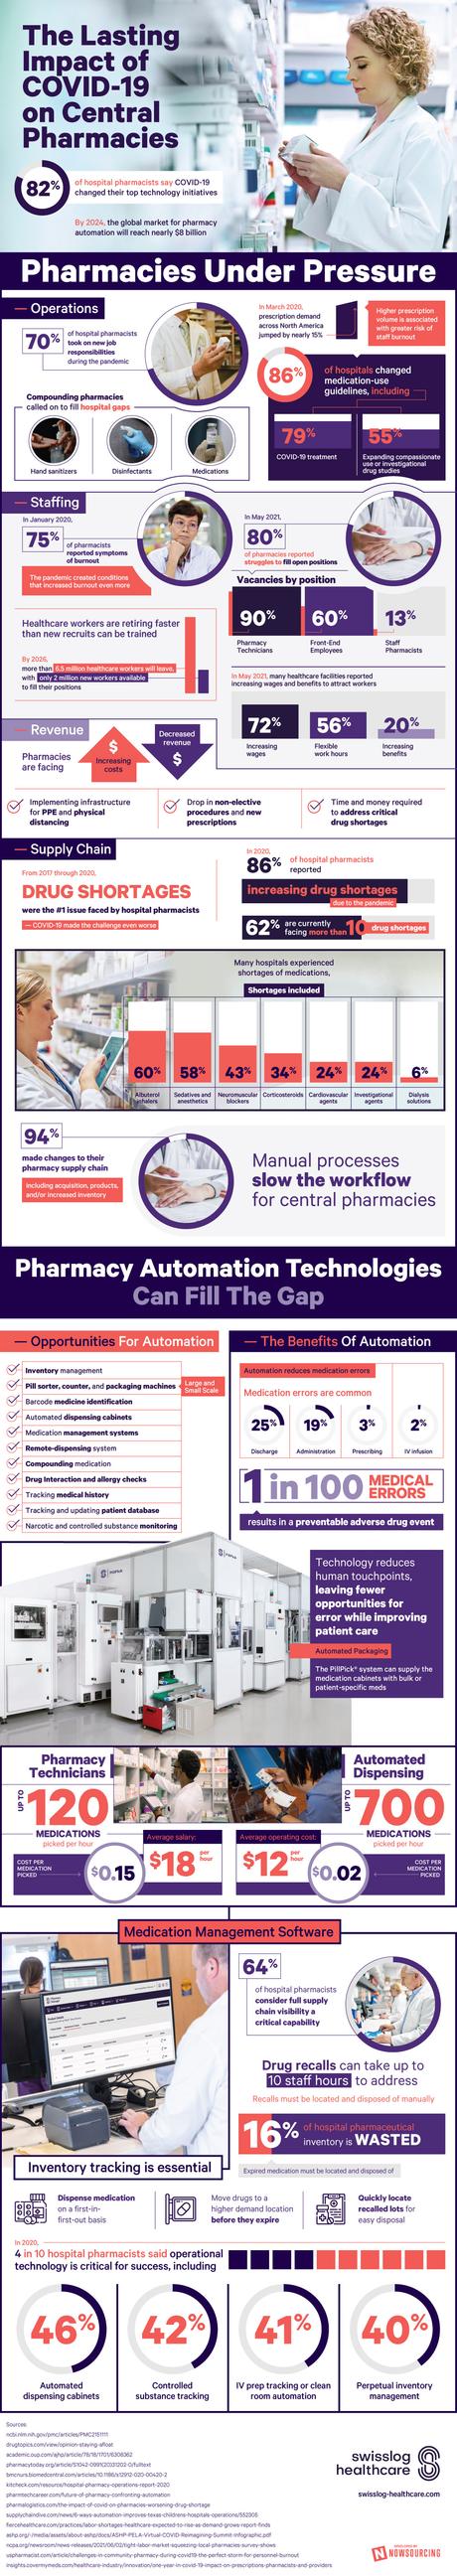 Impact of COVID 19 on Central Pharmacies